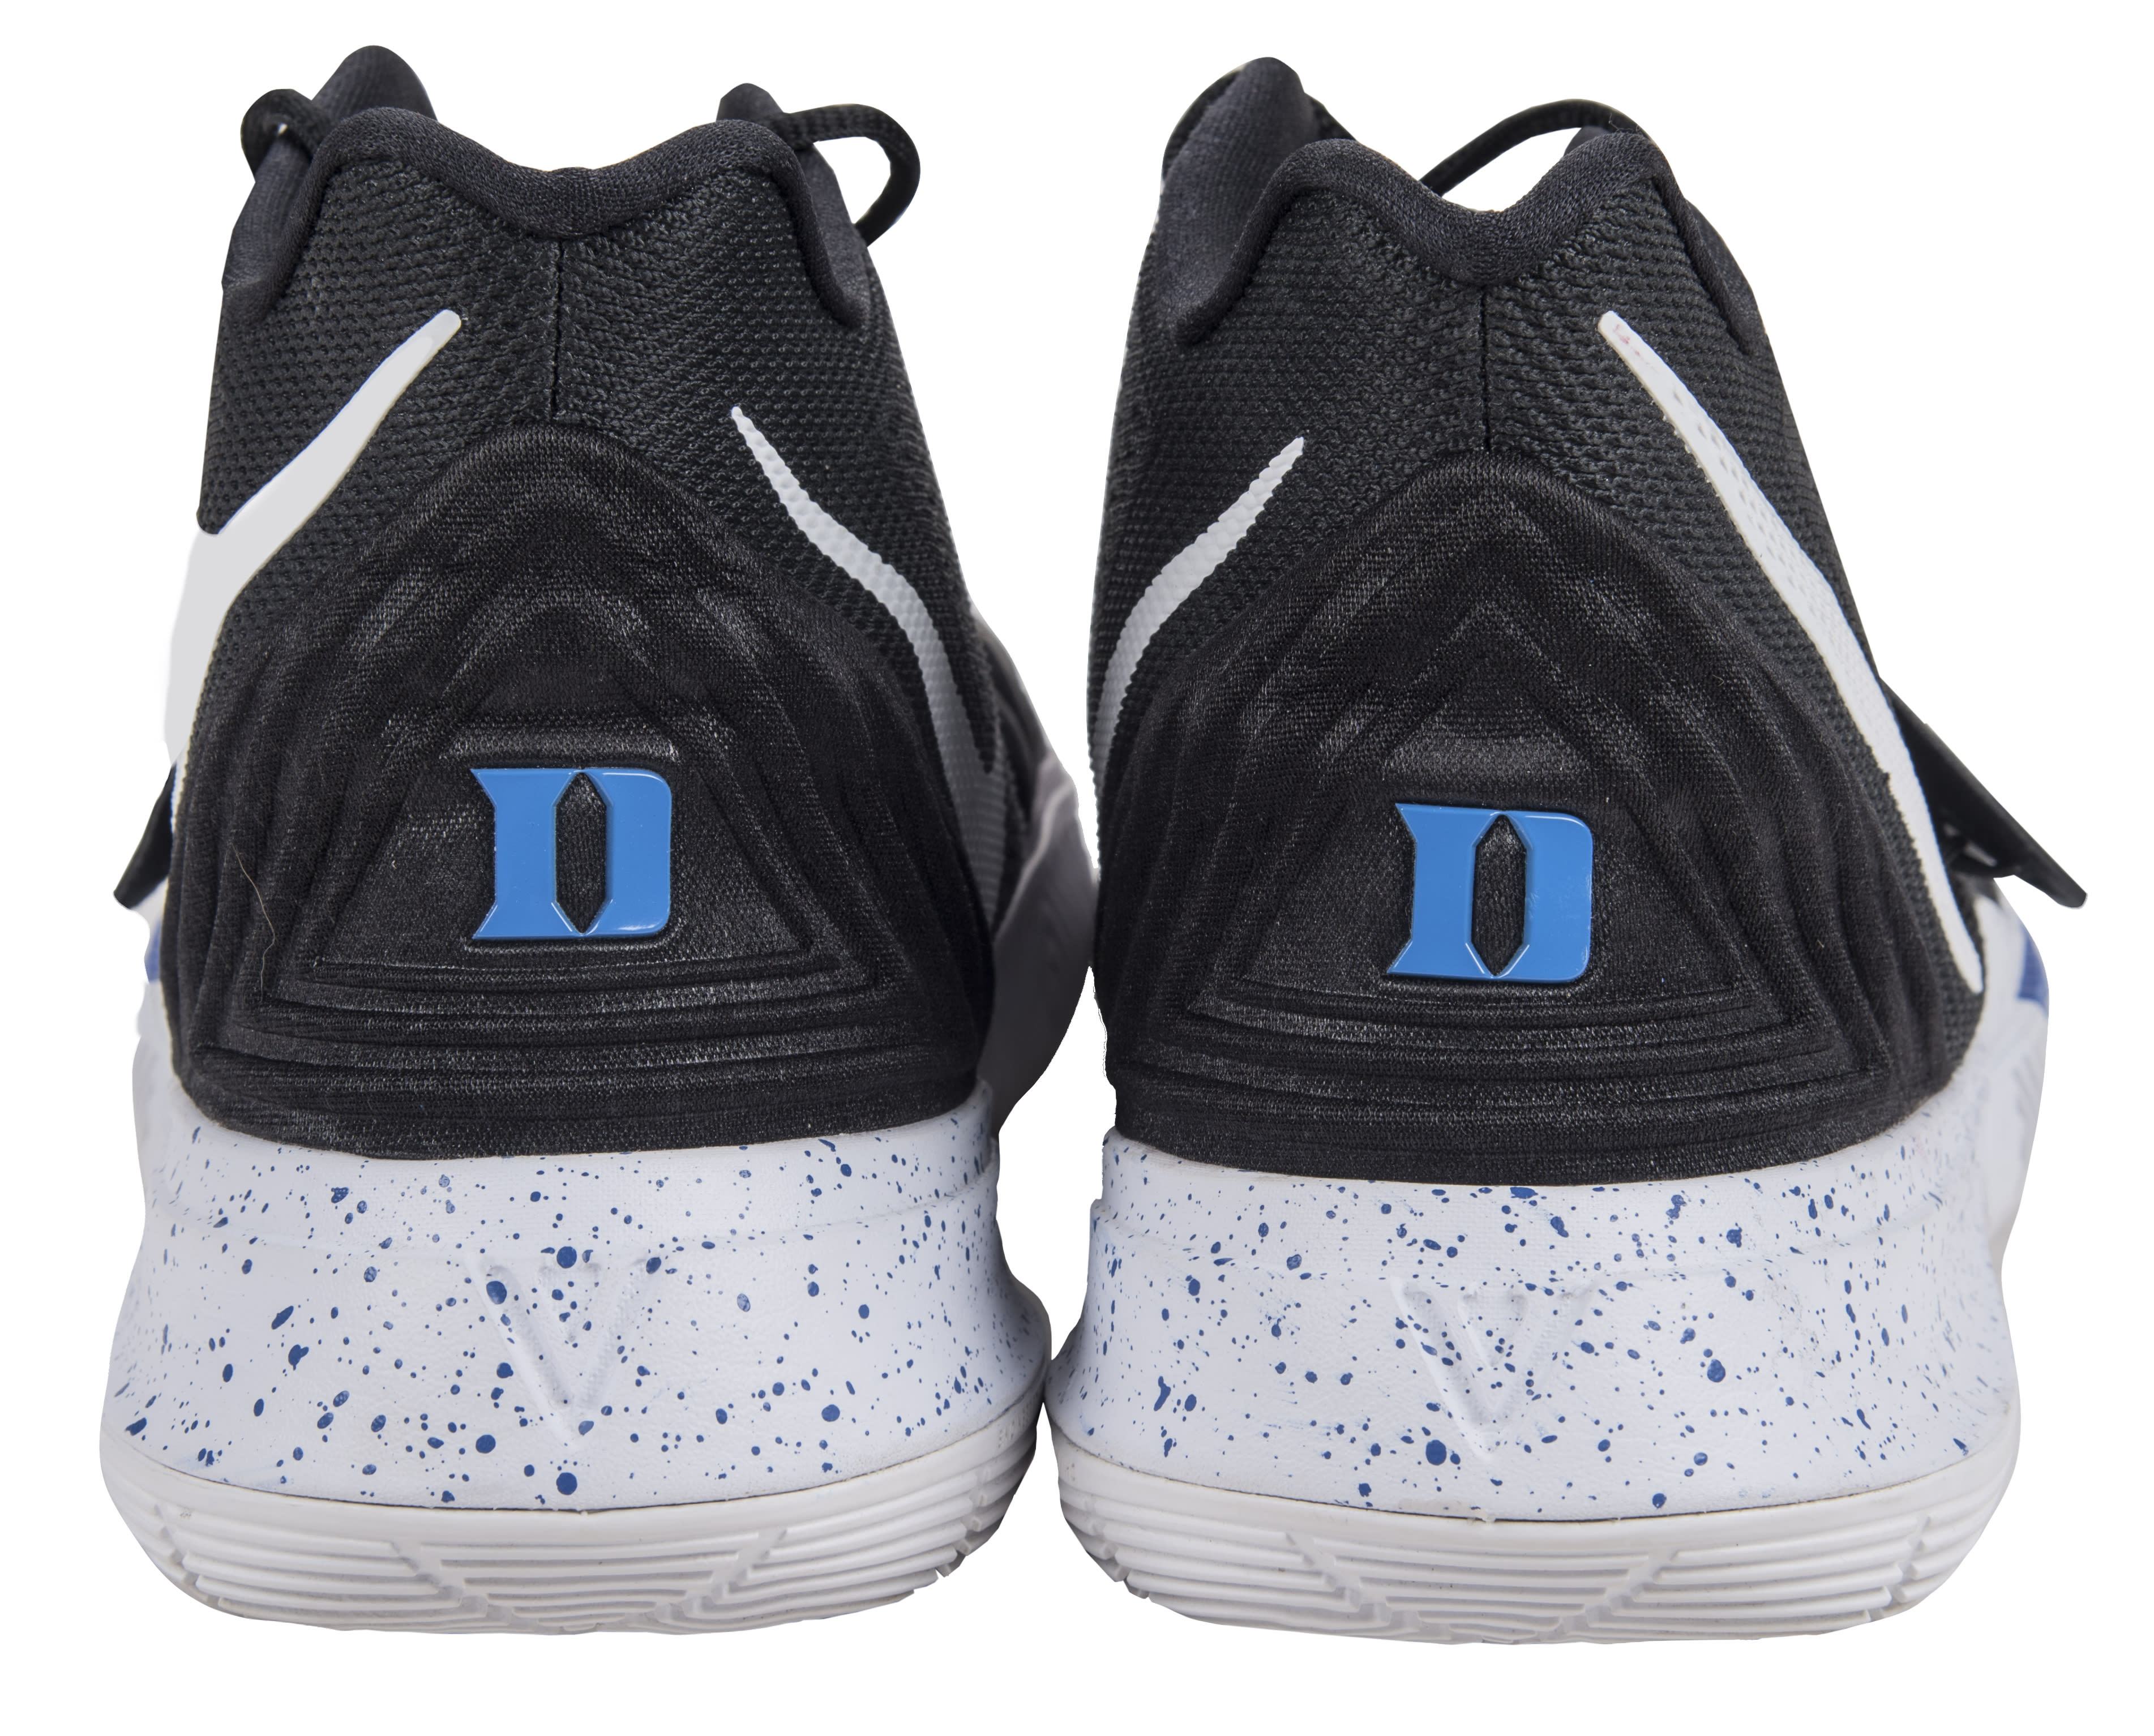 Zion Williamson's Game-Worn Duke Shoes Sell For Insane Amount At Auction